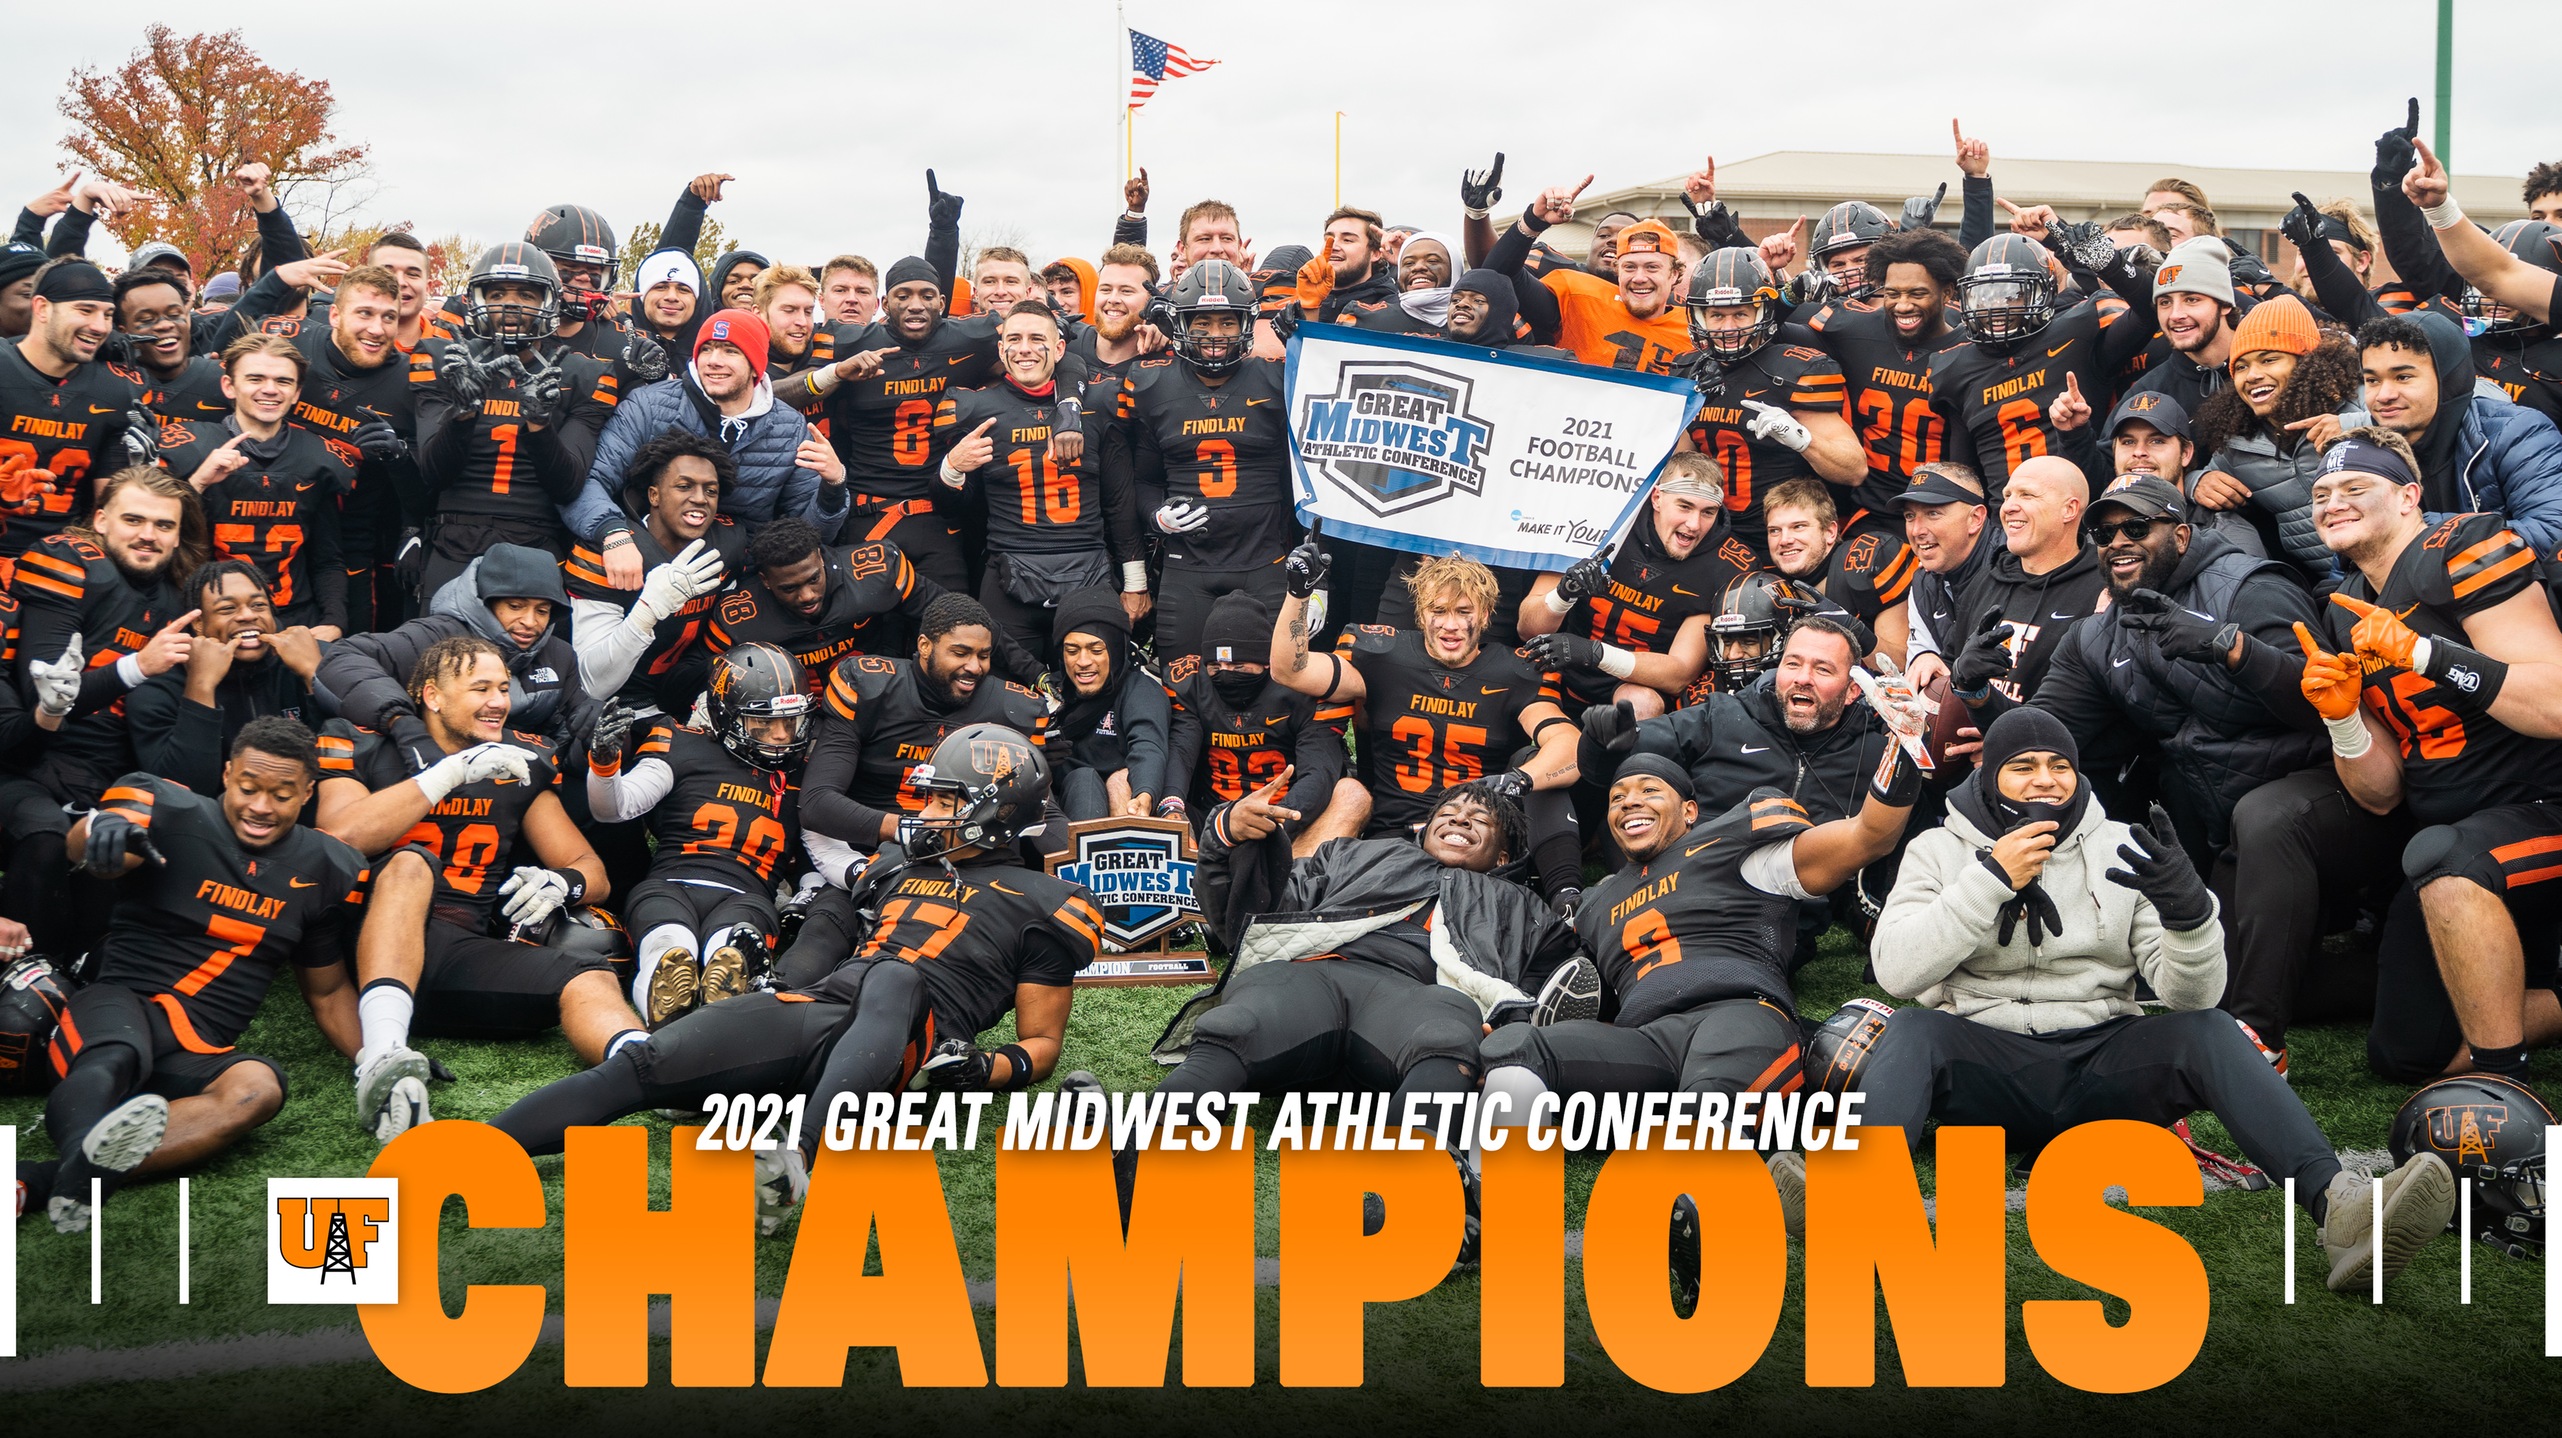 Champions | Football Wins First Conference Title Since 1997